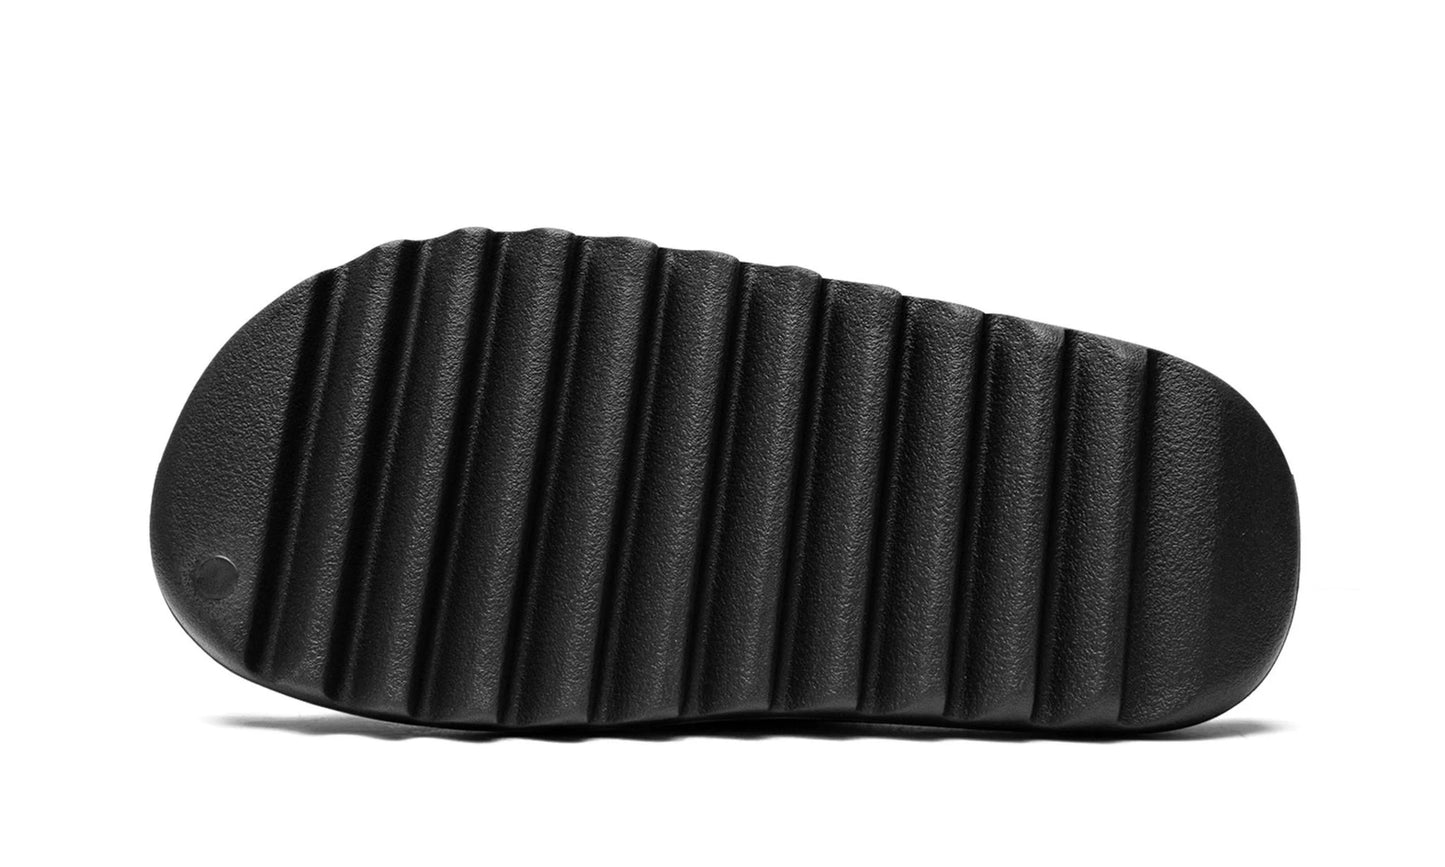 Yeezy Slide Onyx Bottom Outsole View